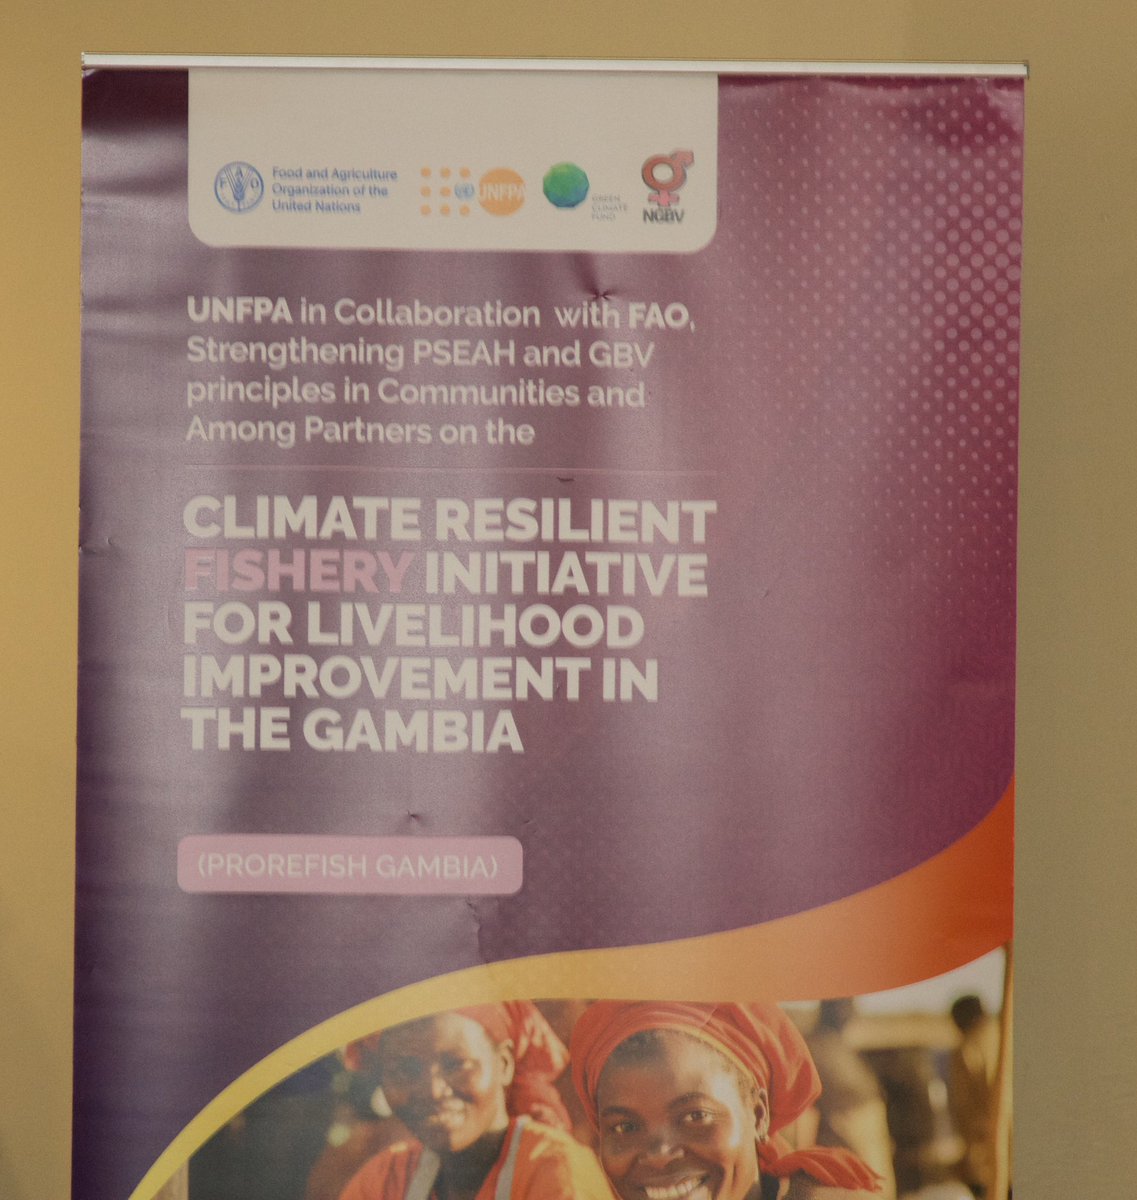 UNFPATheGambia tweet picture